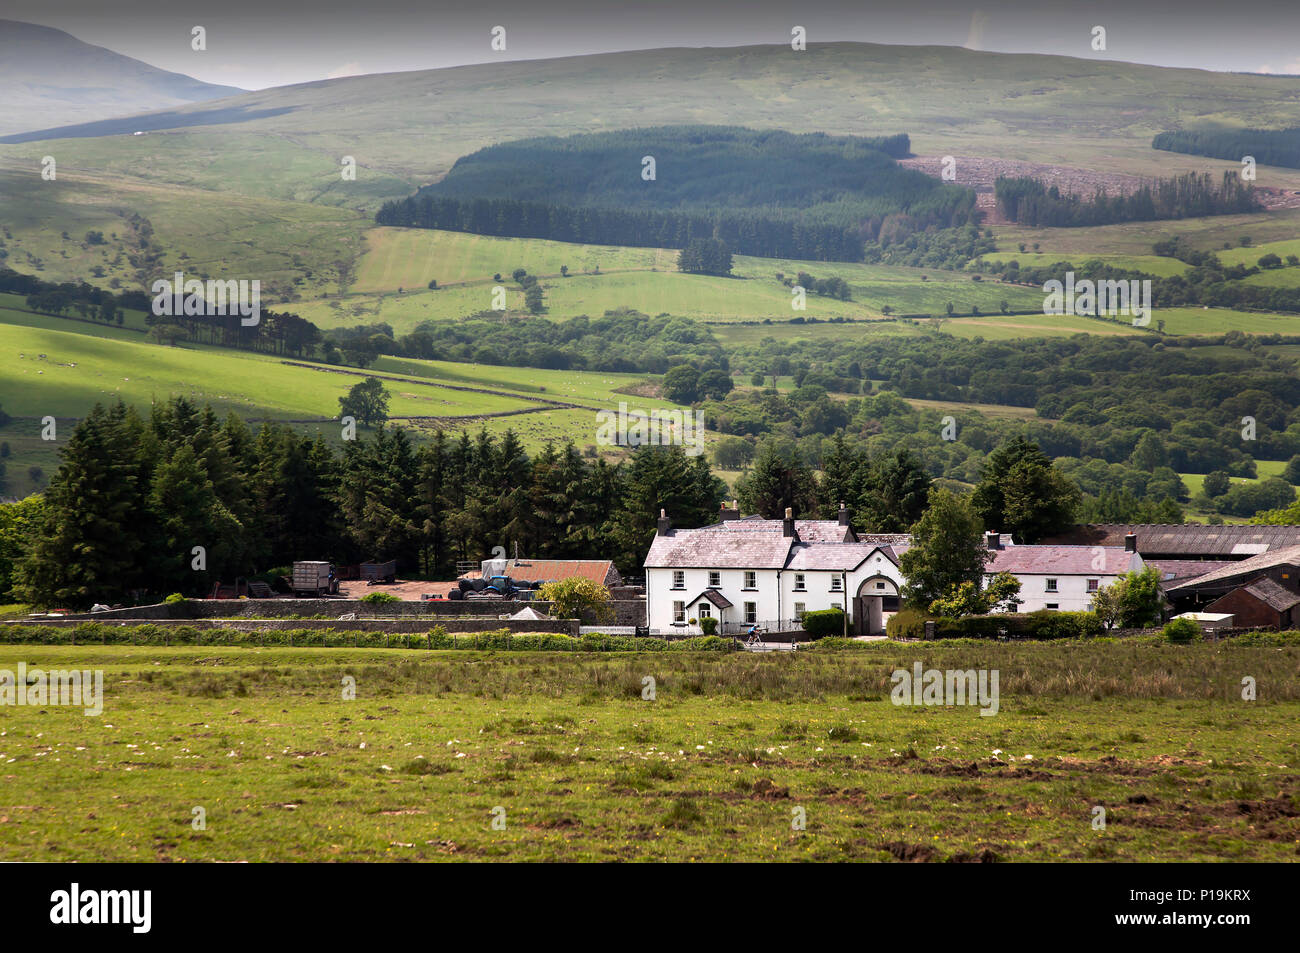 Farm in the Fforest Fawr area of the Brecon Beacons National Park, Wales, UK Stock Photo